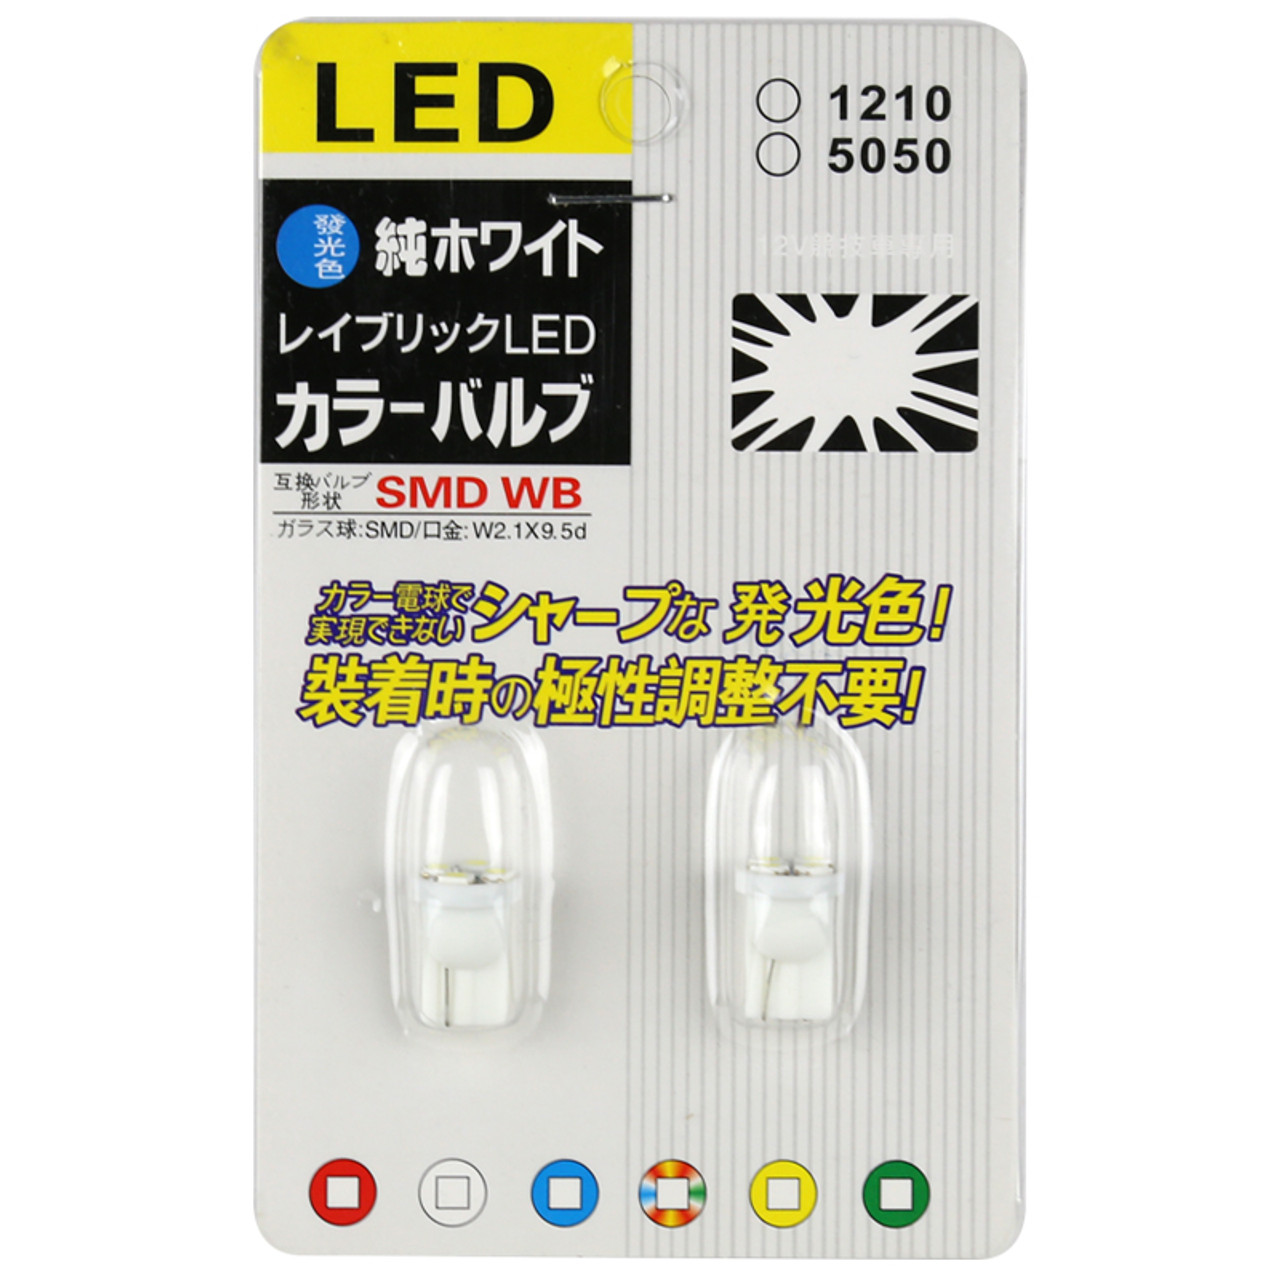 Lampadine 2 x 4 LED SMD CANBUS - T10 W5W - France-Xenon